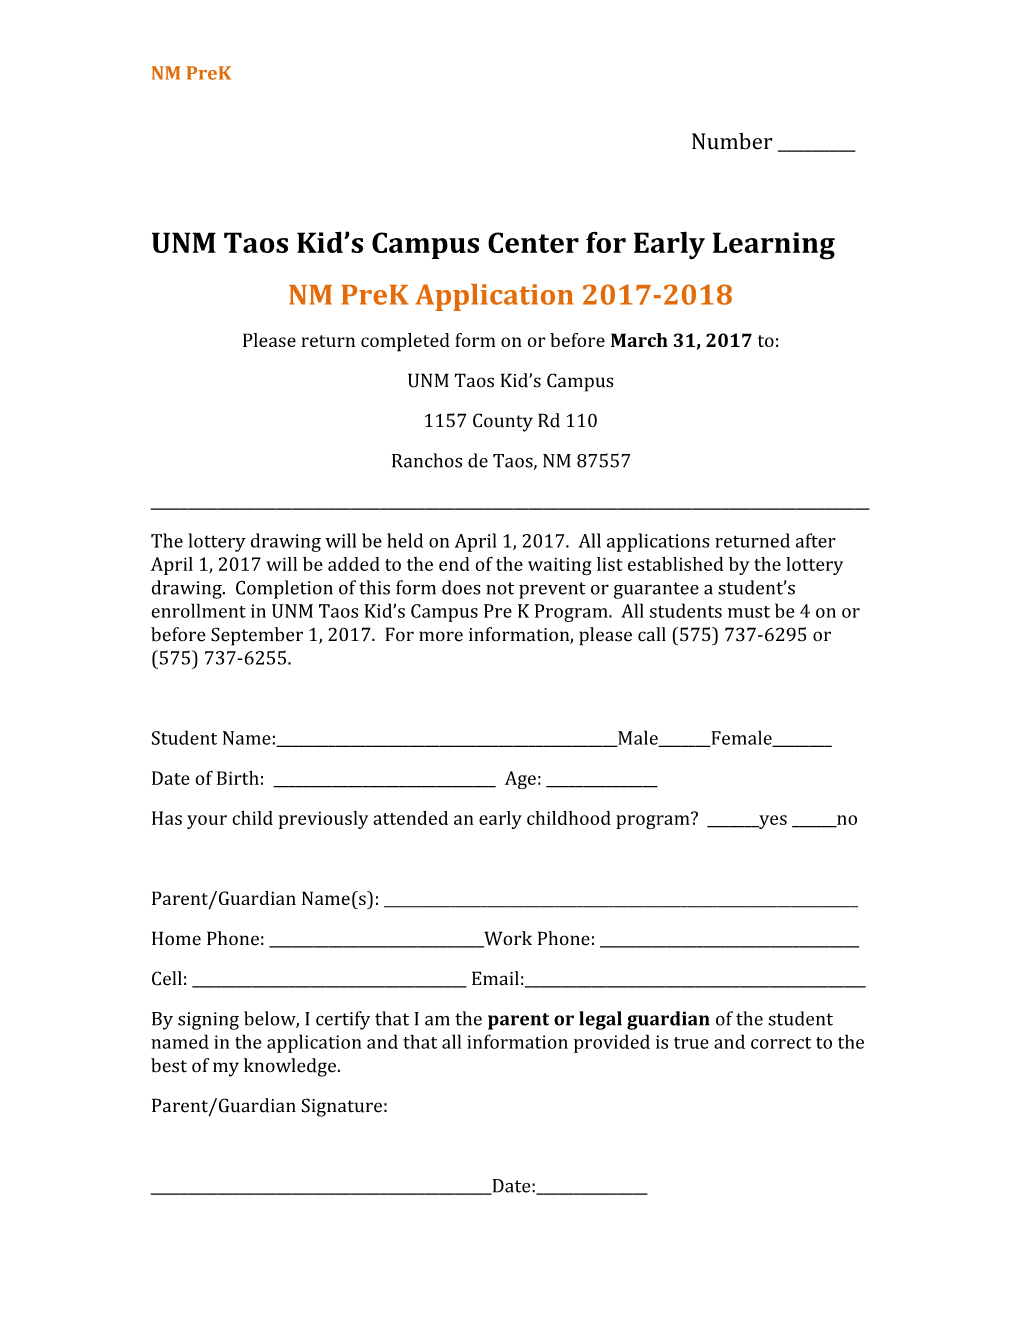 UNM Taos Kid S Campus Center for Early Learning